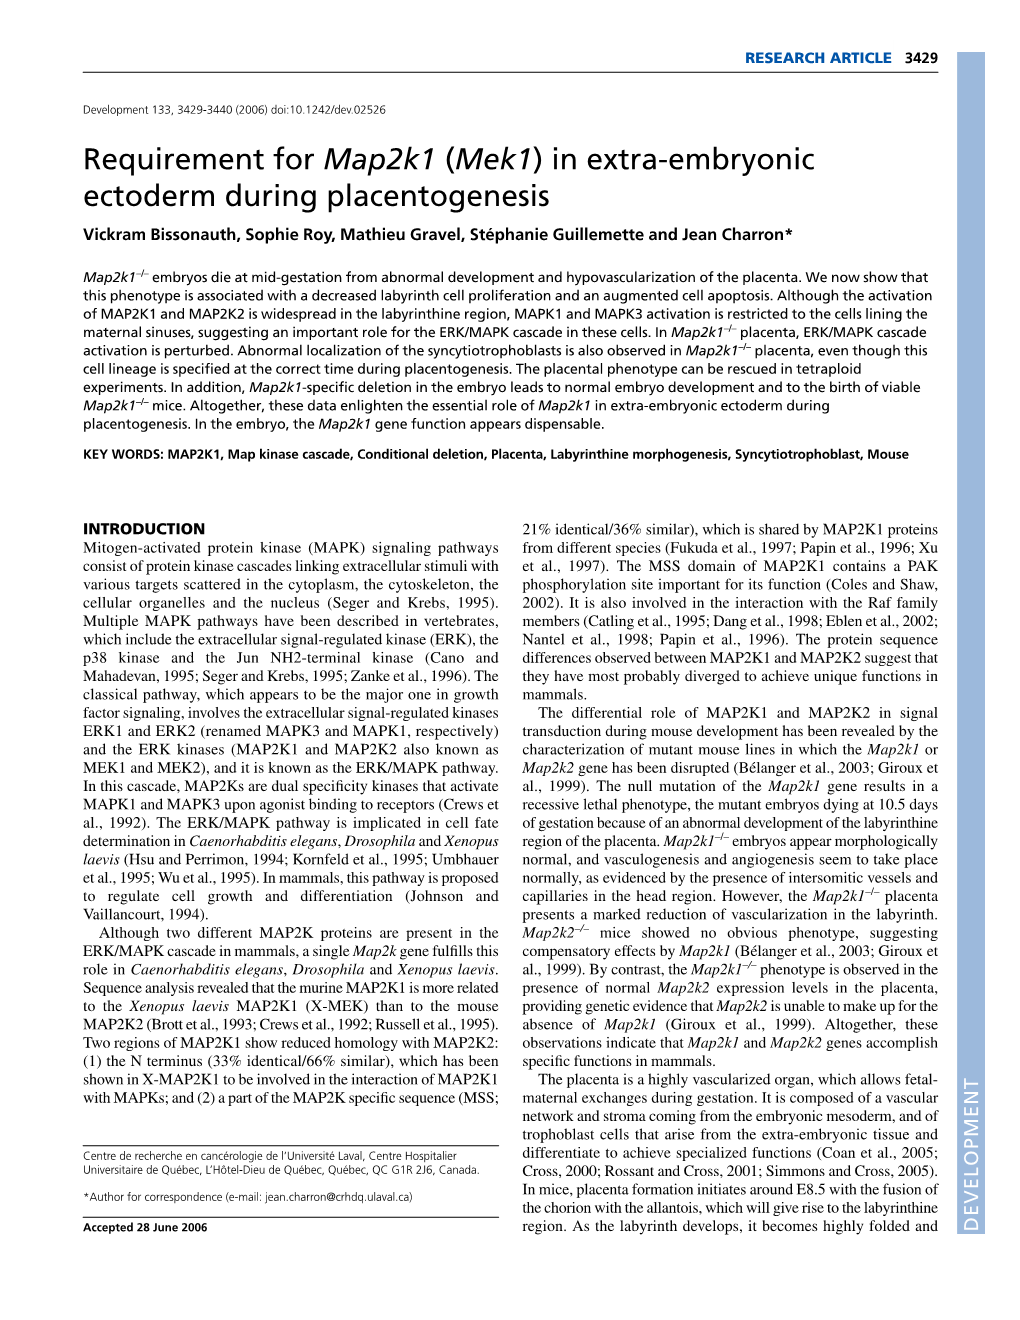 Requirement for Map2k1 (Mek1) in Extra-Embryonic Ectoderm During Placentogenesis